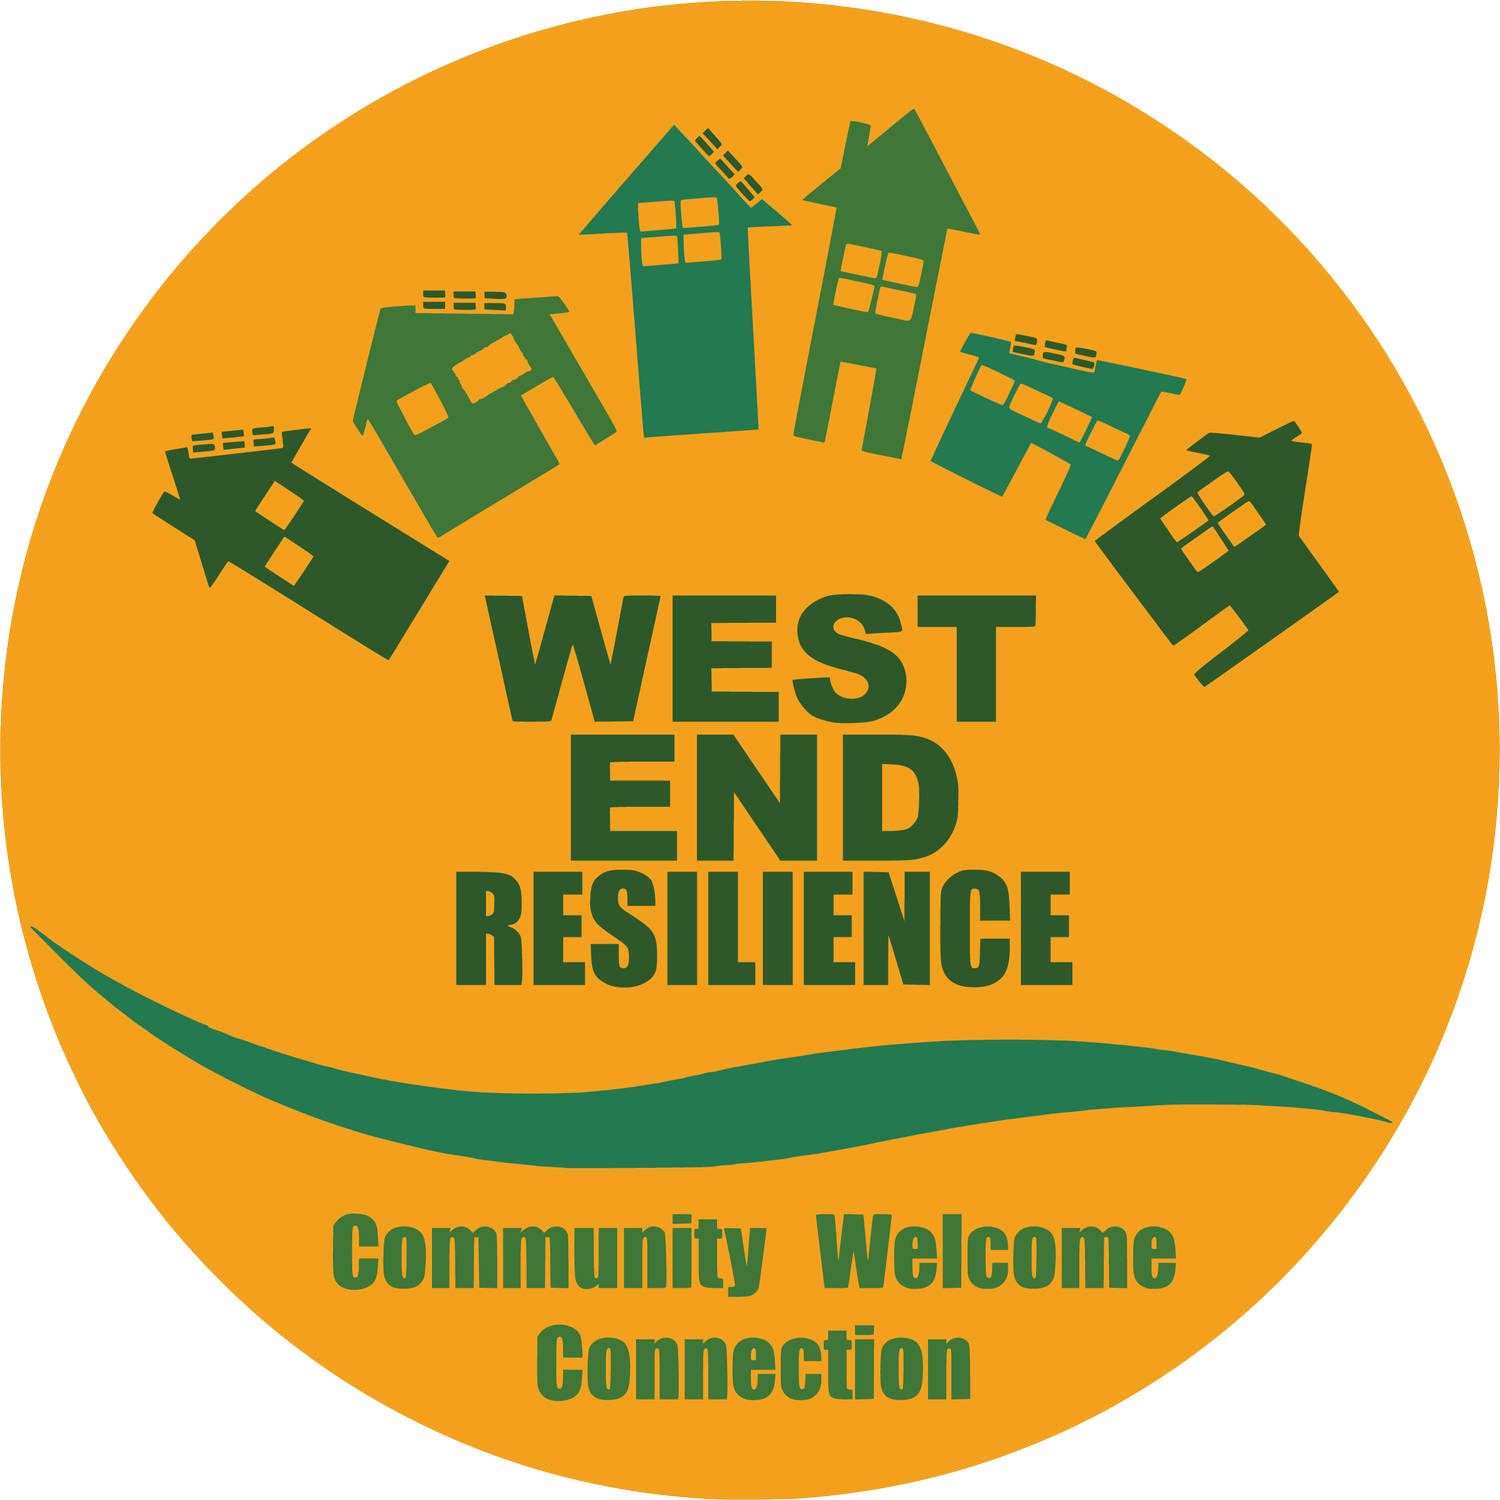 WEST END RESILIENCE